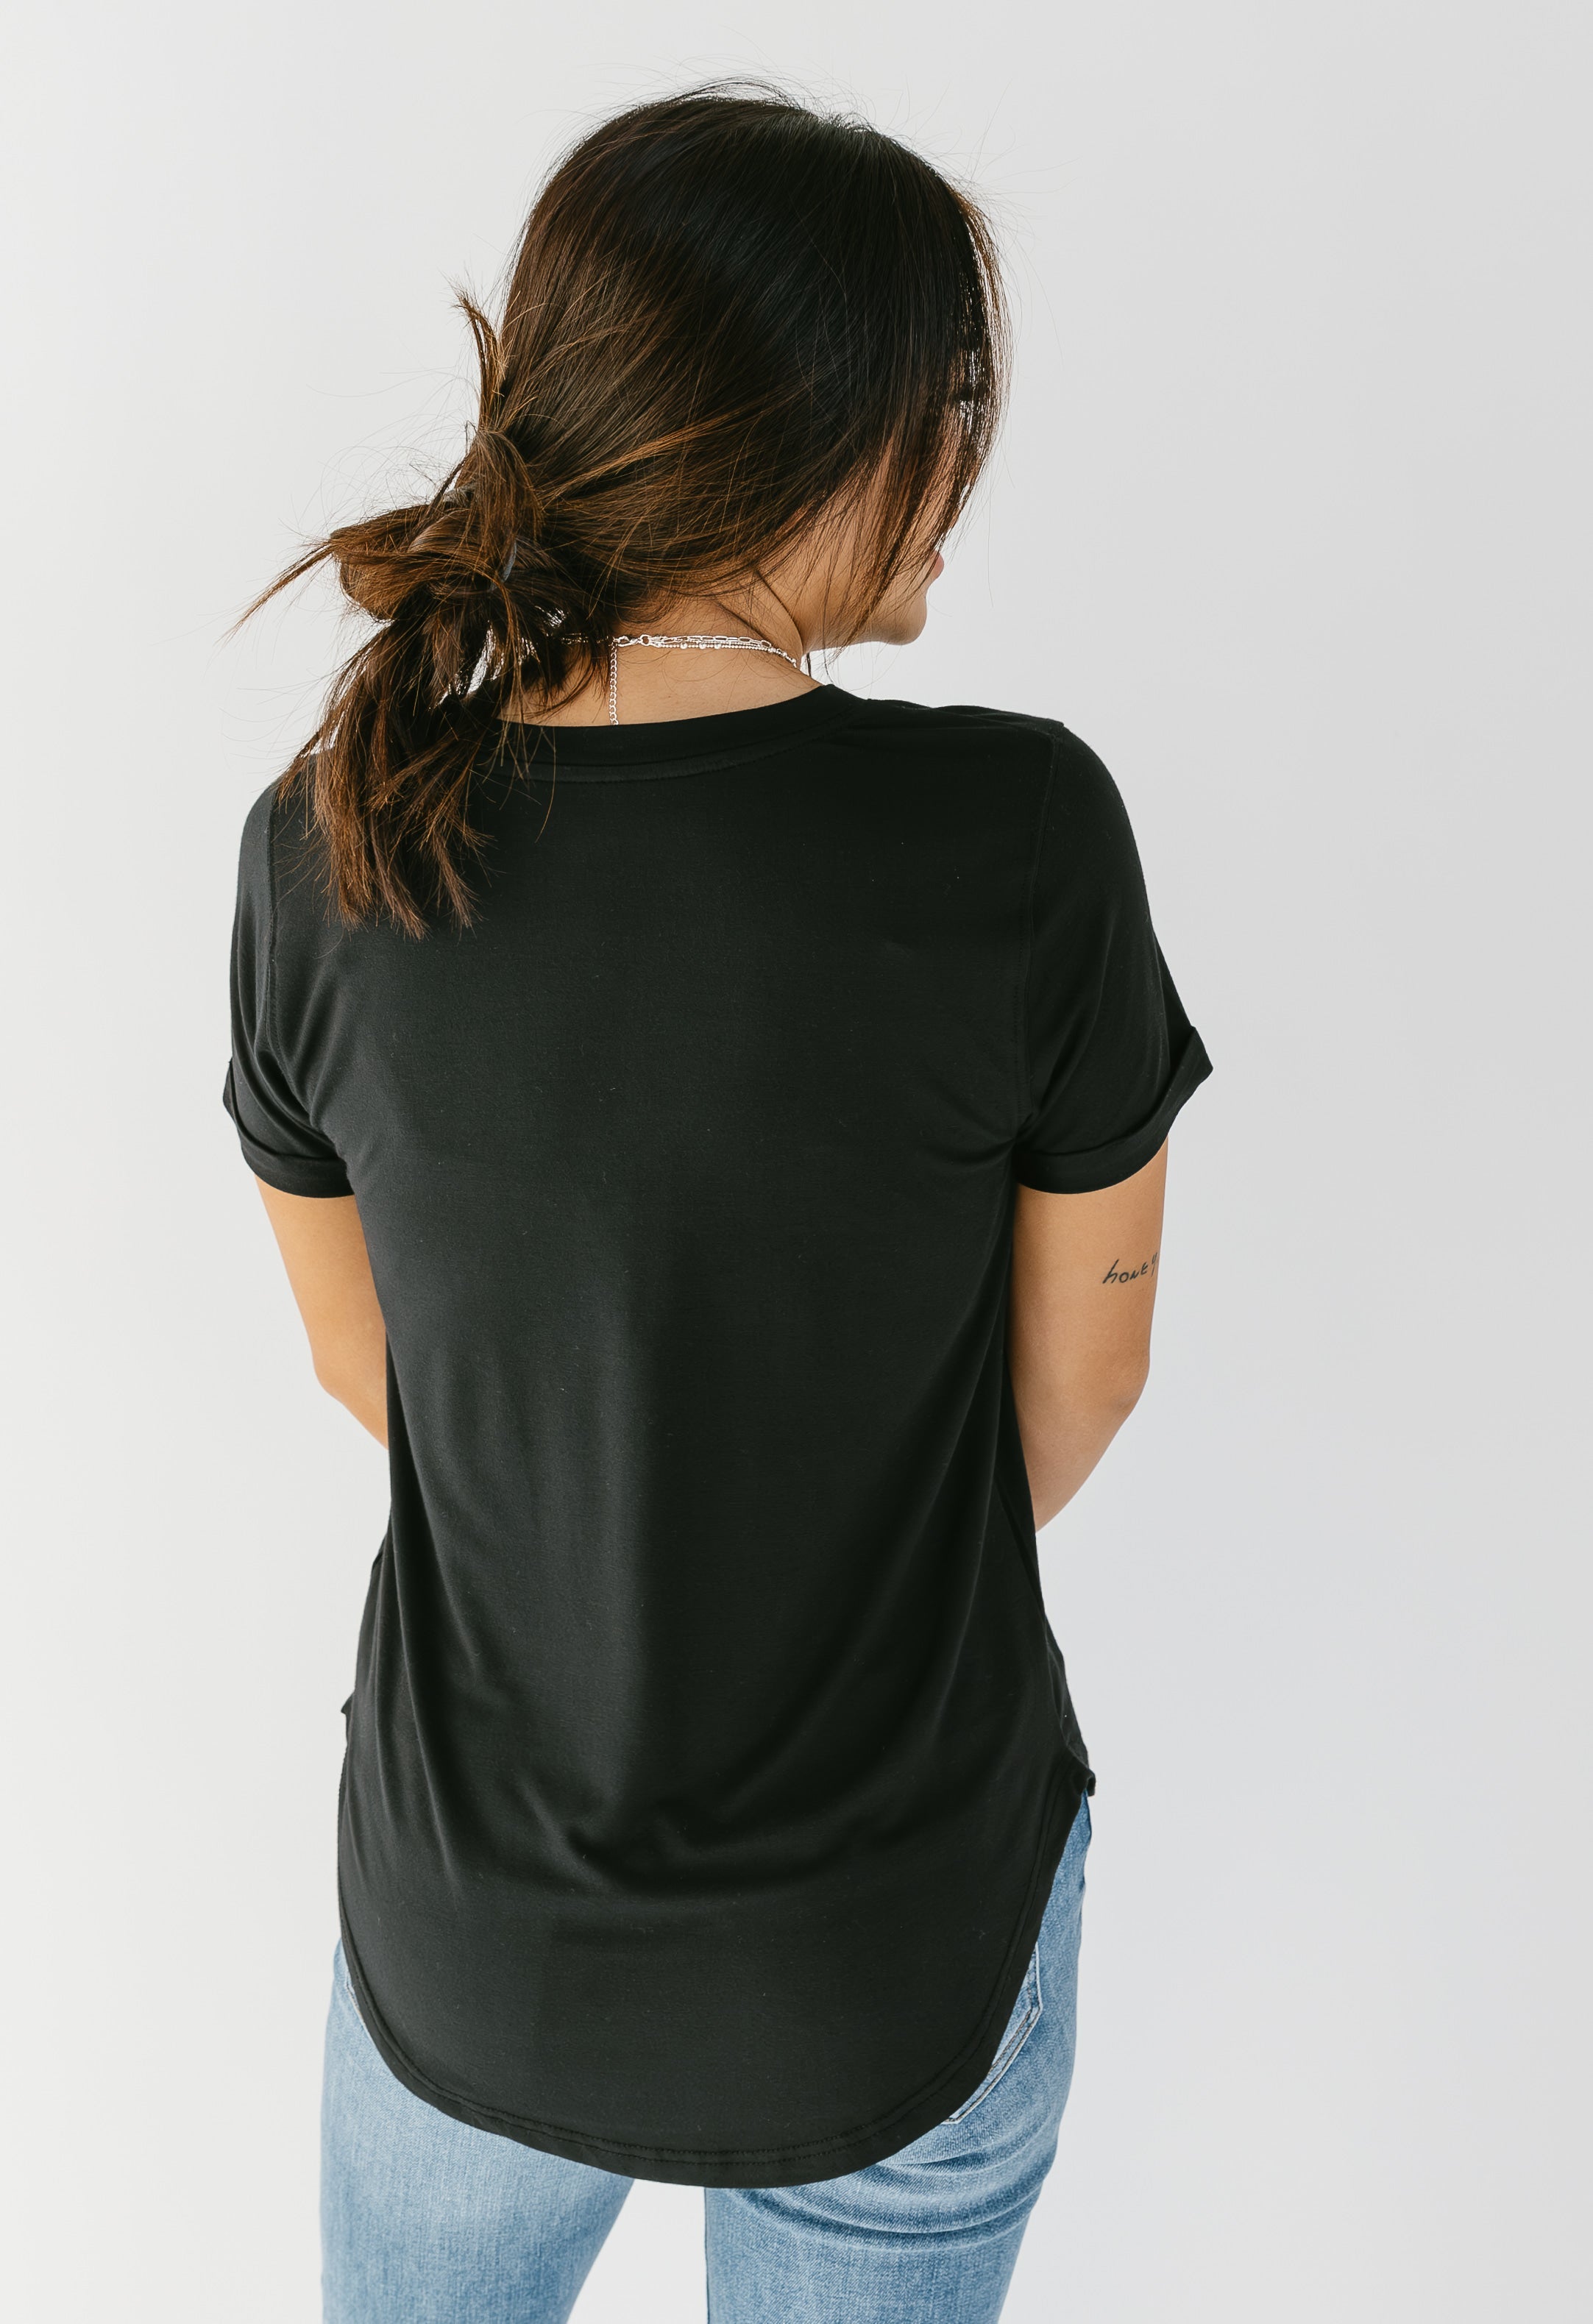 Lanelle Tee - BLACK - willows clothing S/S Shirt